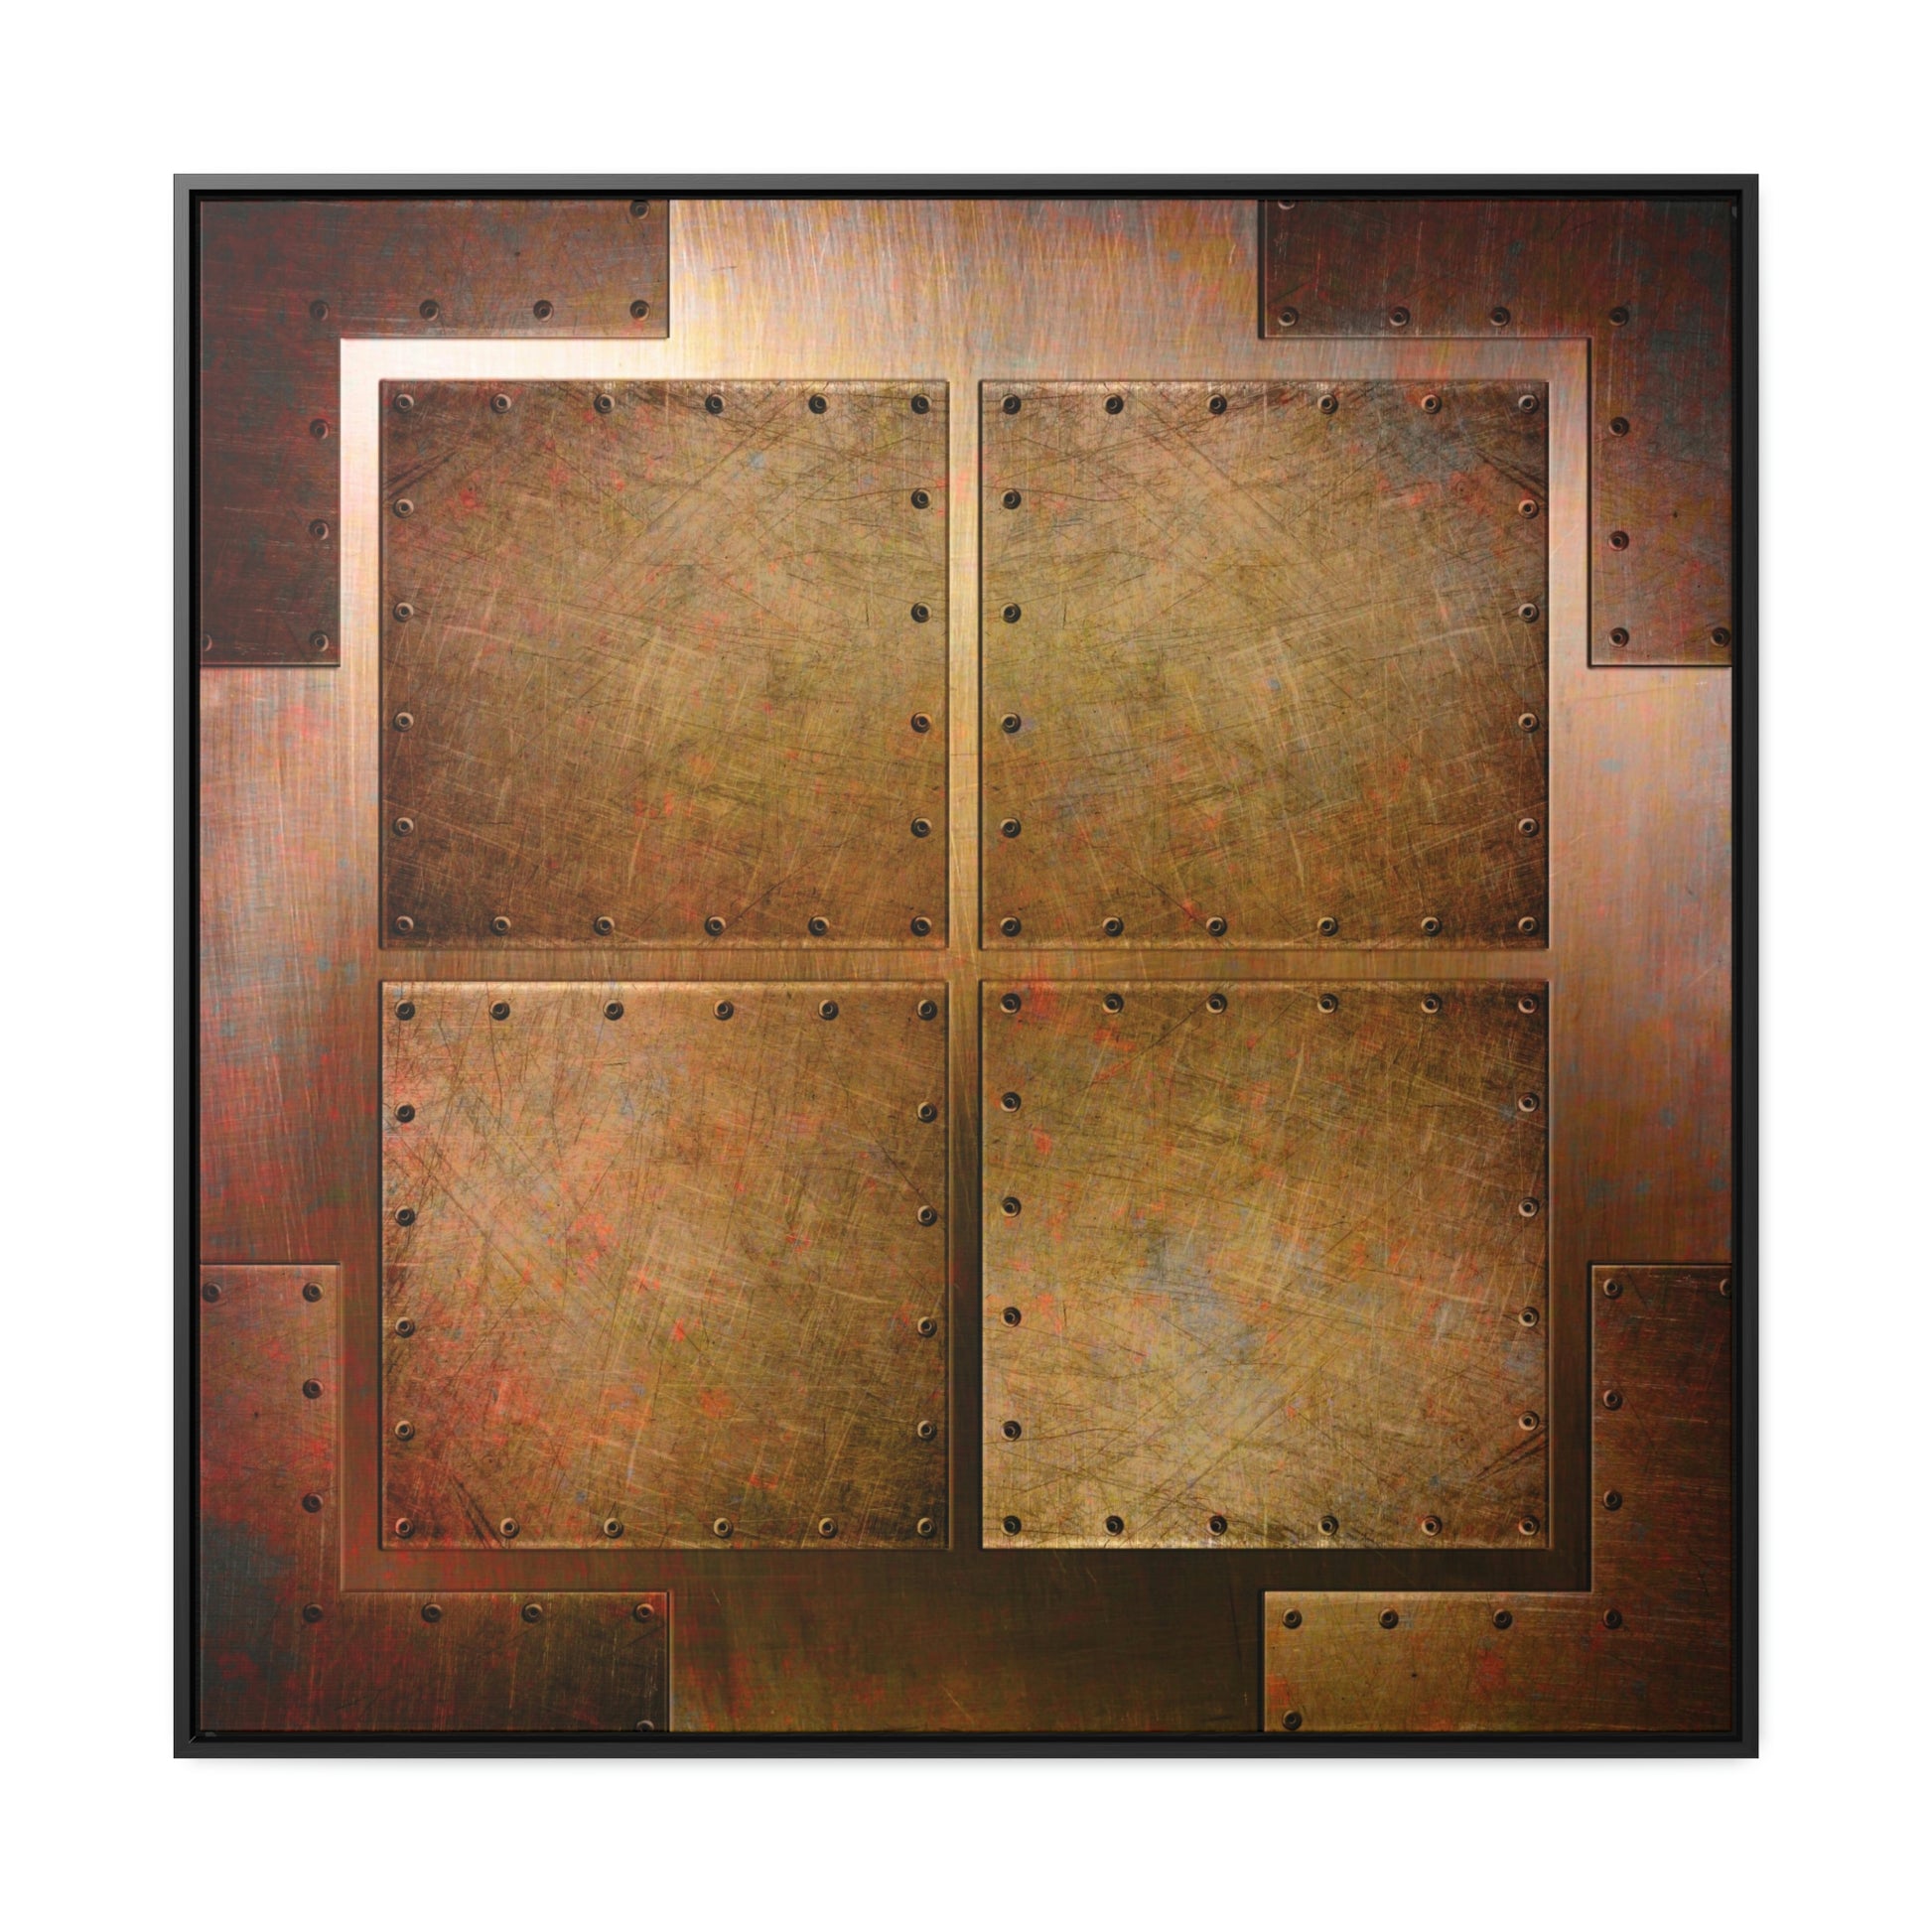 Steampunk Themed Framed Wall Art - Distressed, Riveted Copper Sheets Print on Canvas in a Floating Frame 5 sizes available